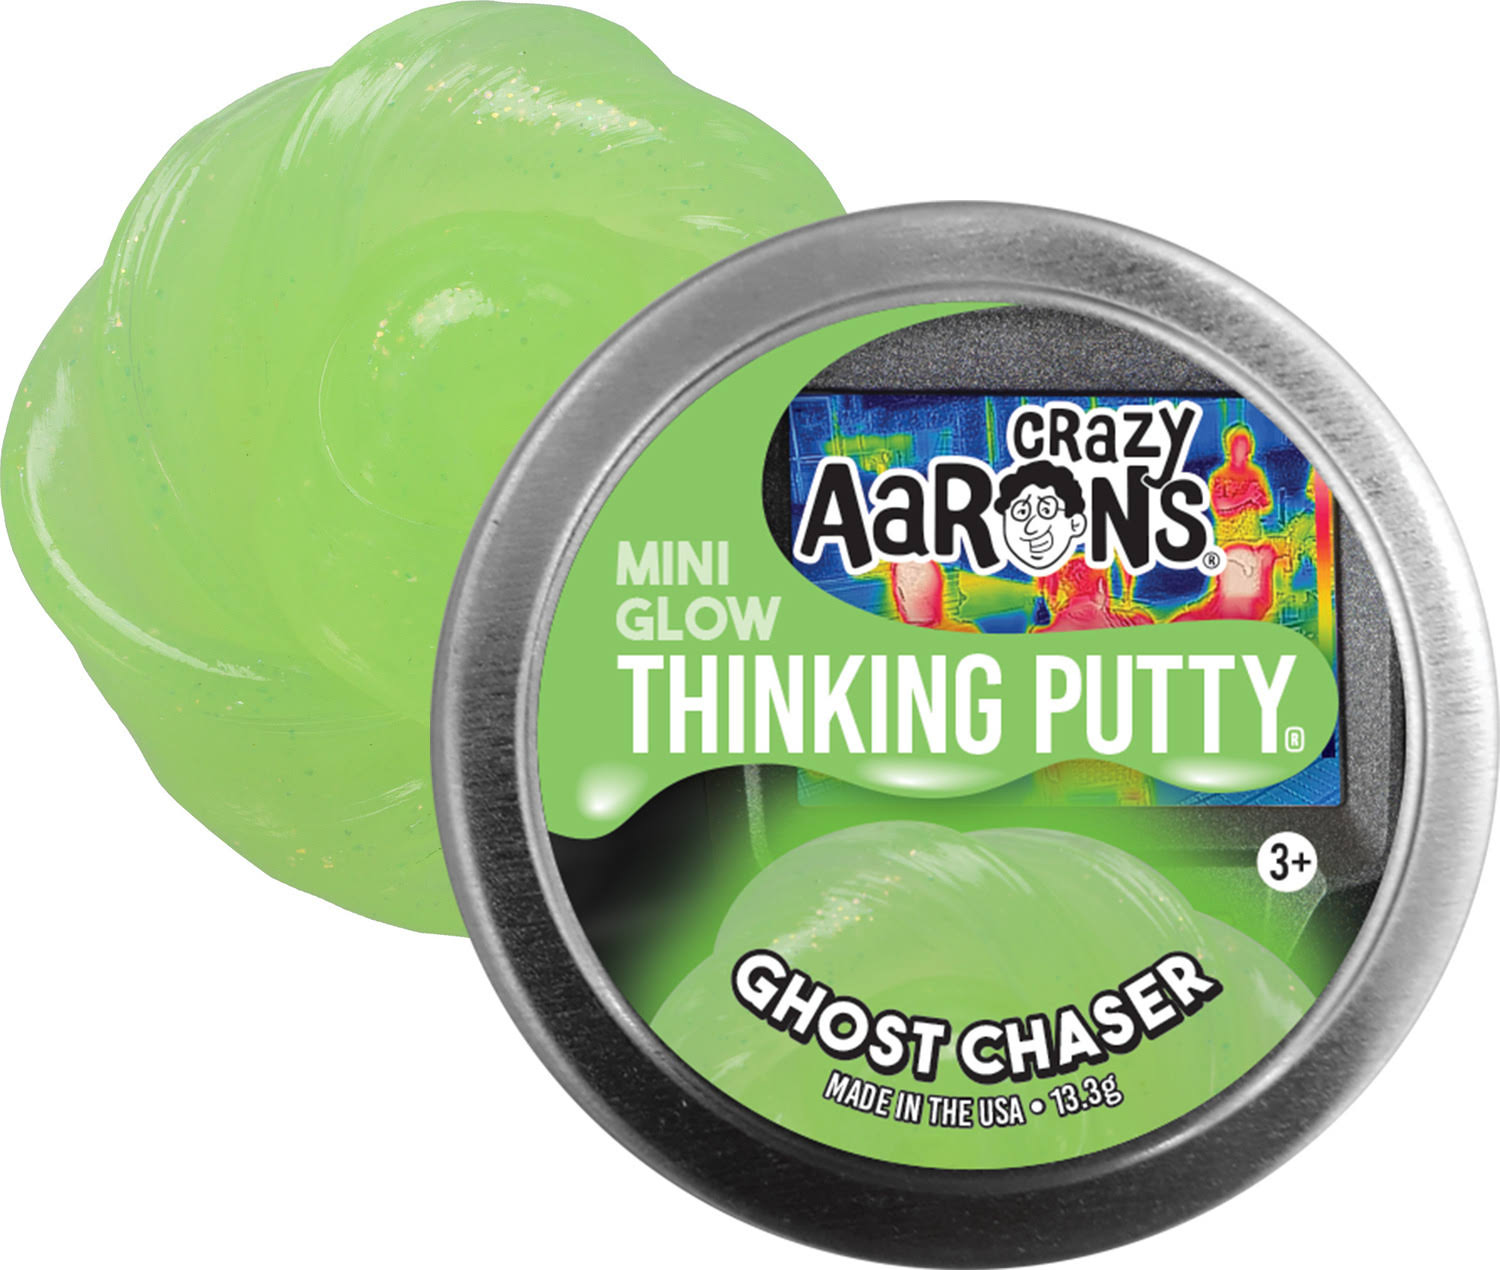 Crazy Aaron's Thinking Putty Small - Mini Glow - Ghost Chaser